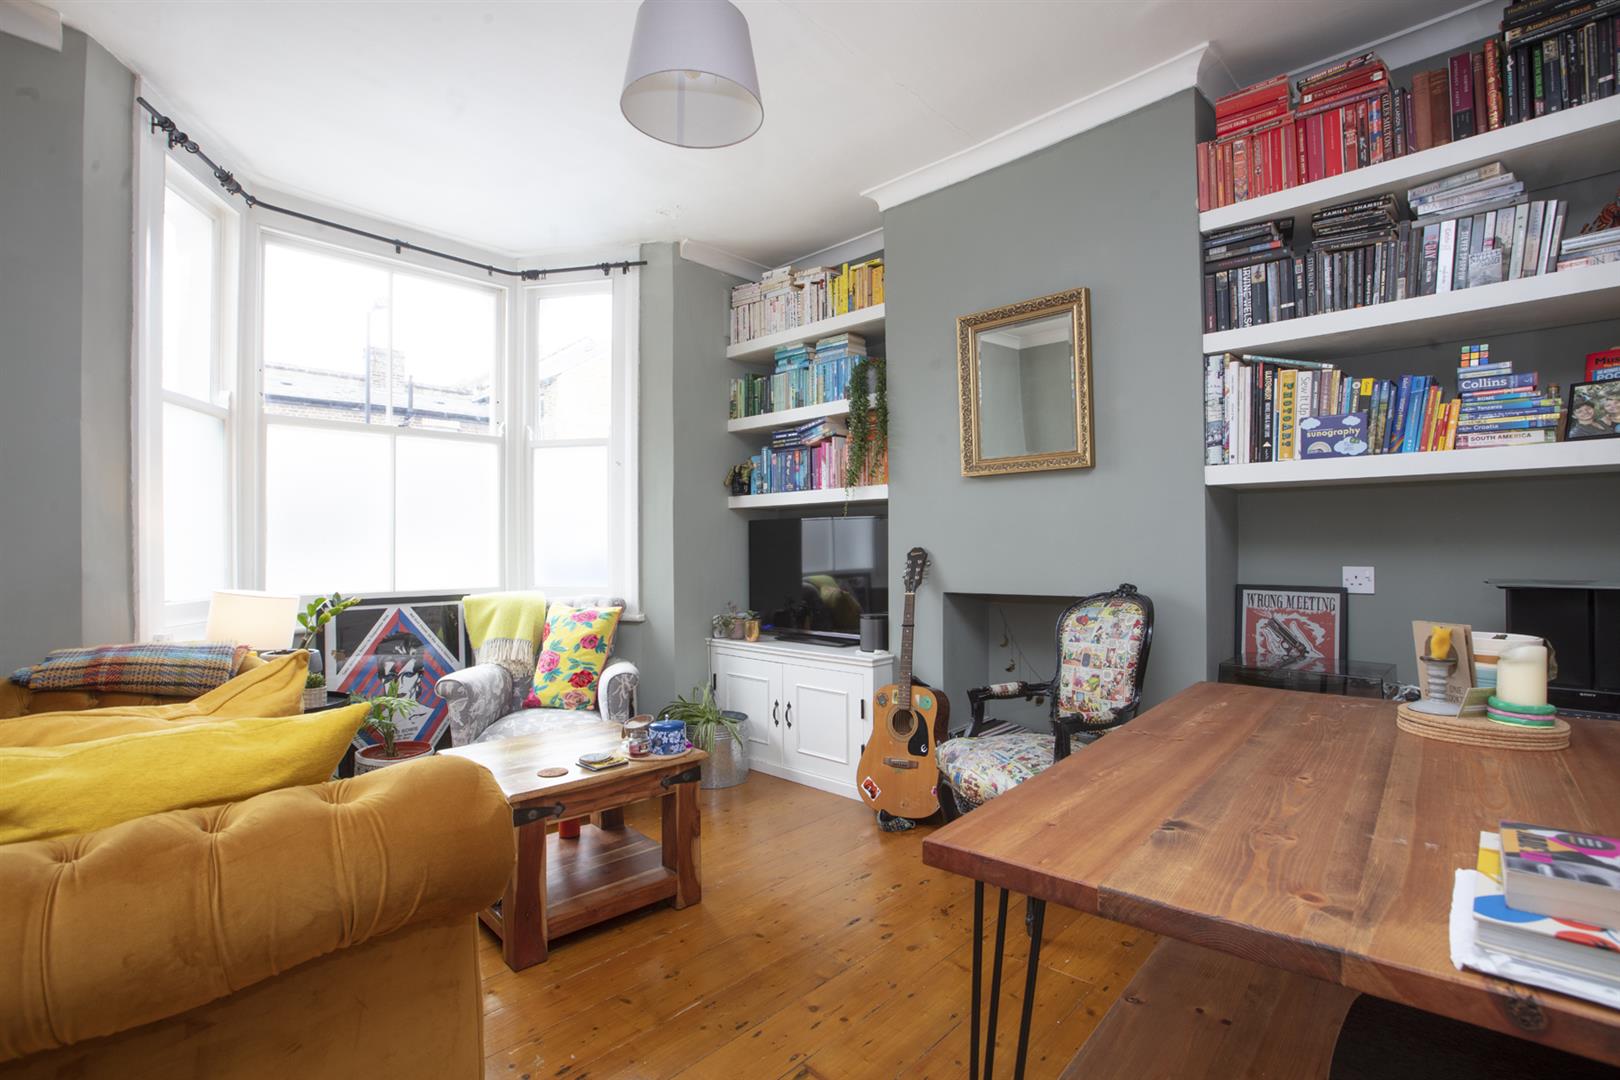 Flat - Conversion Sold in Colls Road, Peckham, SE15 1071 view2